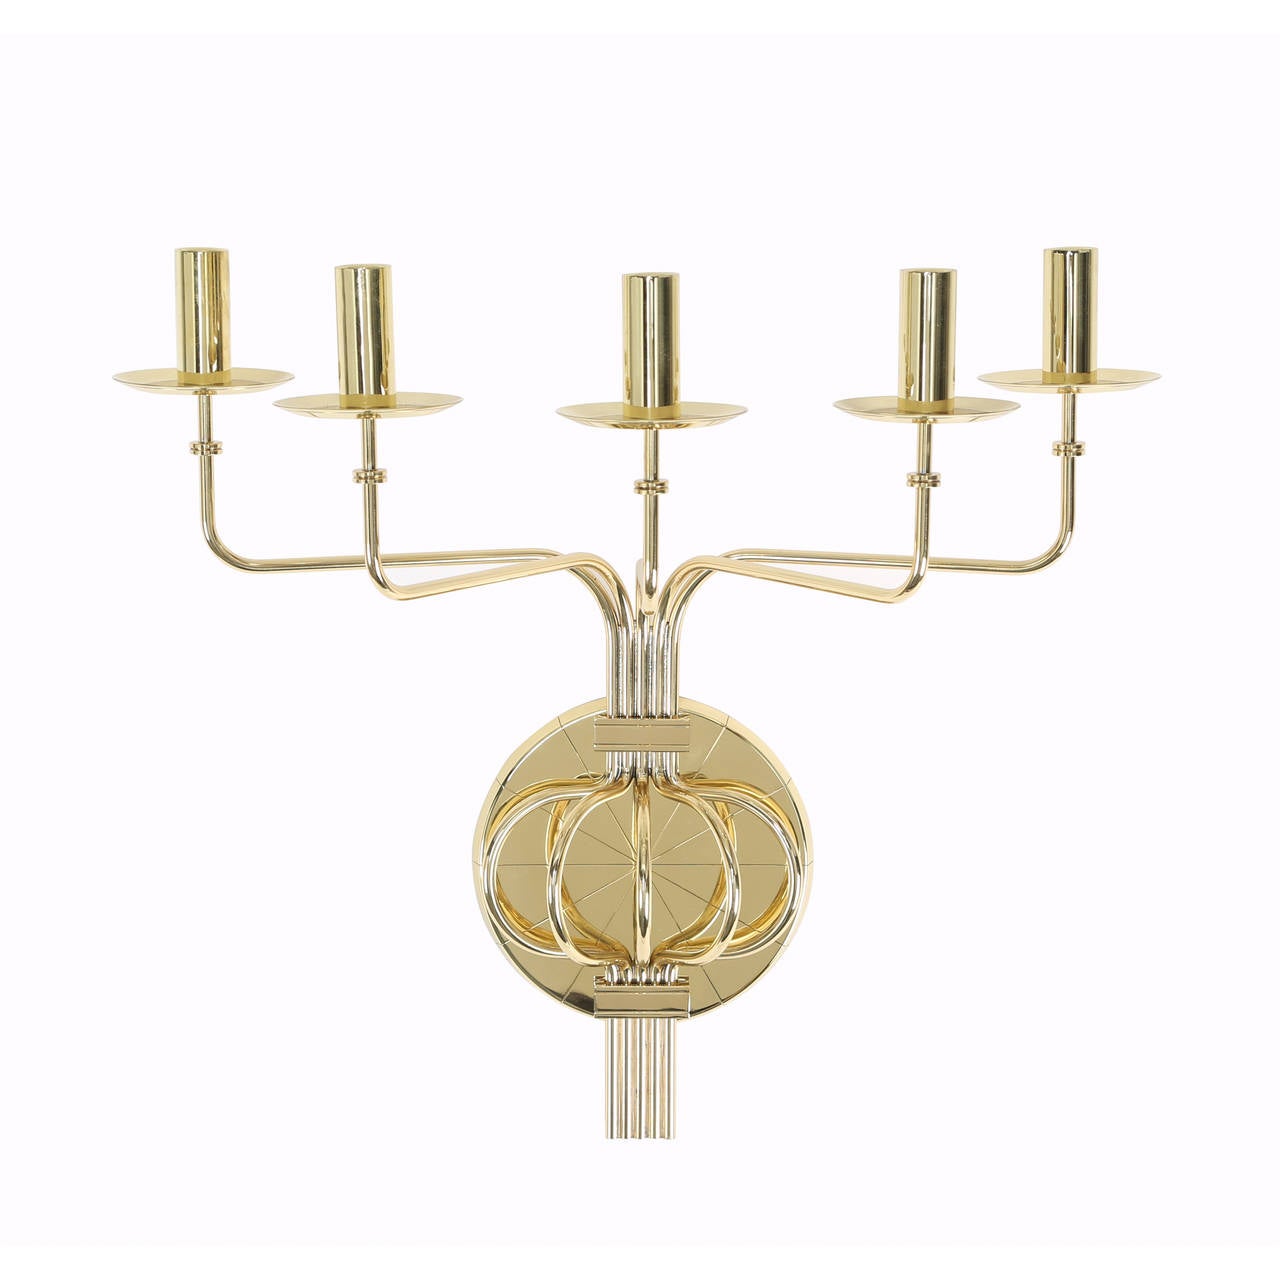 Large and dramatic solid-brass candle sconces with five splayed arms anchored in a disc engraved with Parzinger's signature radial pattern, circa 1950s. Newly polished and lacquered. 


